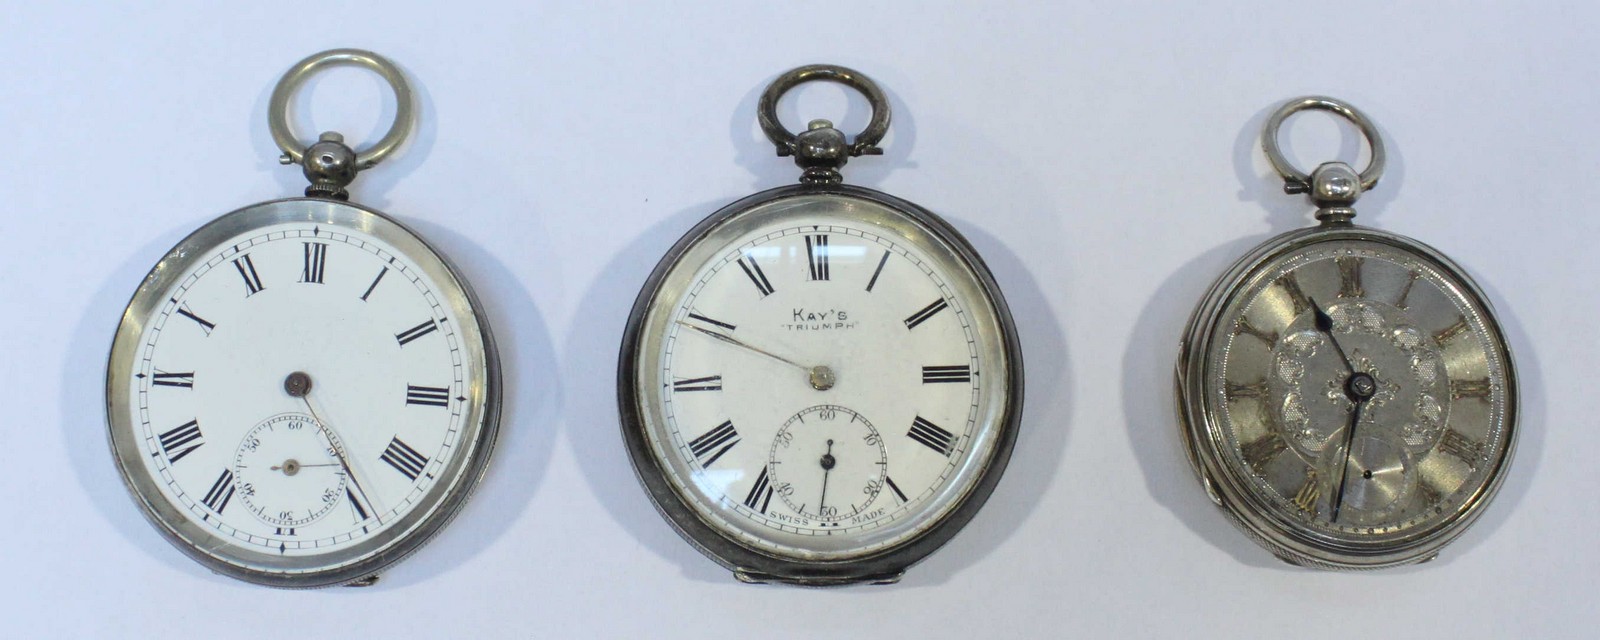 Three various silver pocket watches, two with white enamel dials, all three with Roman numerals